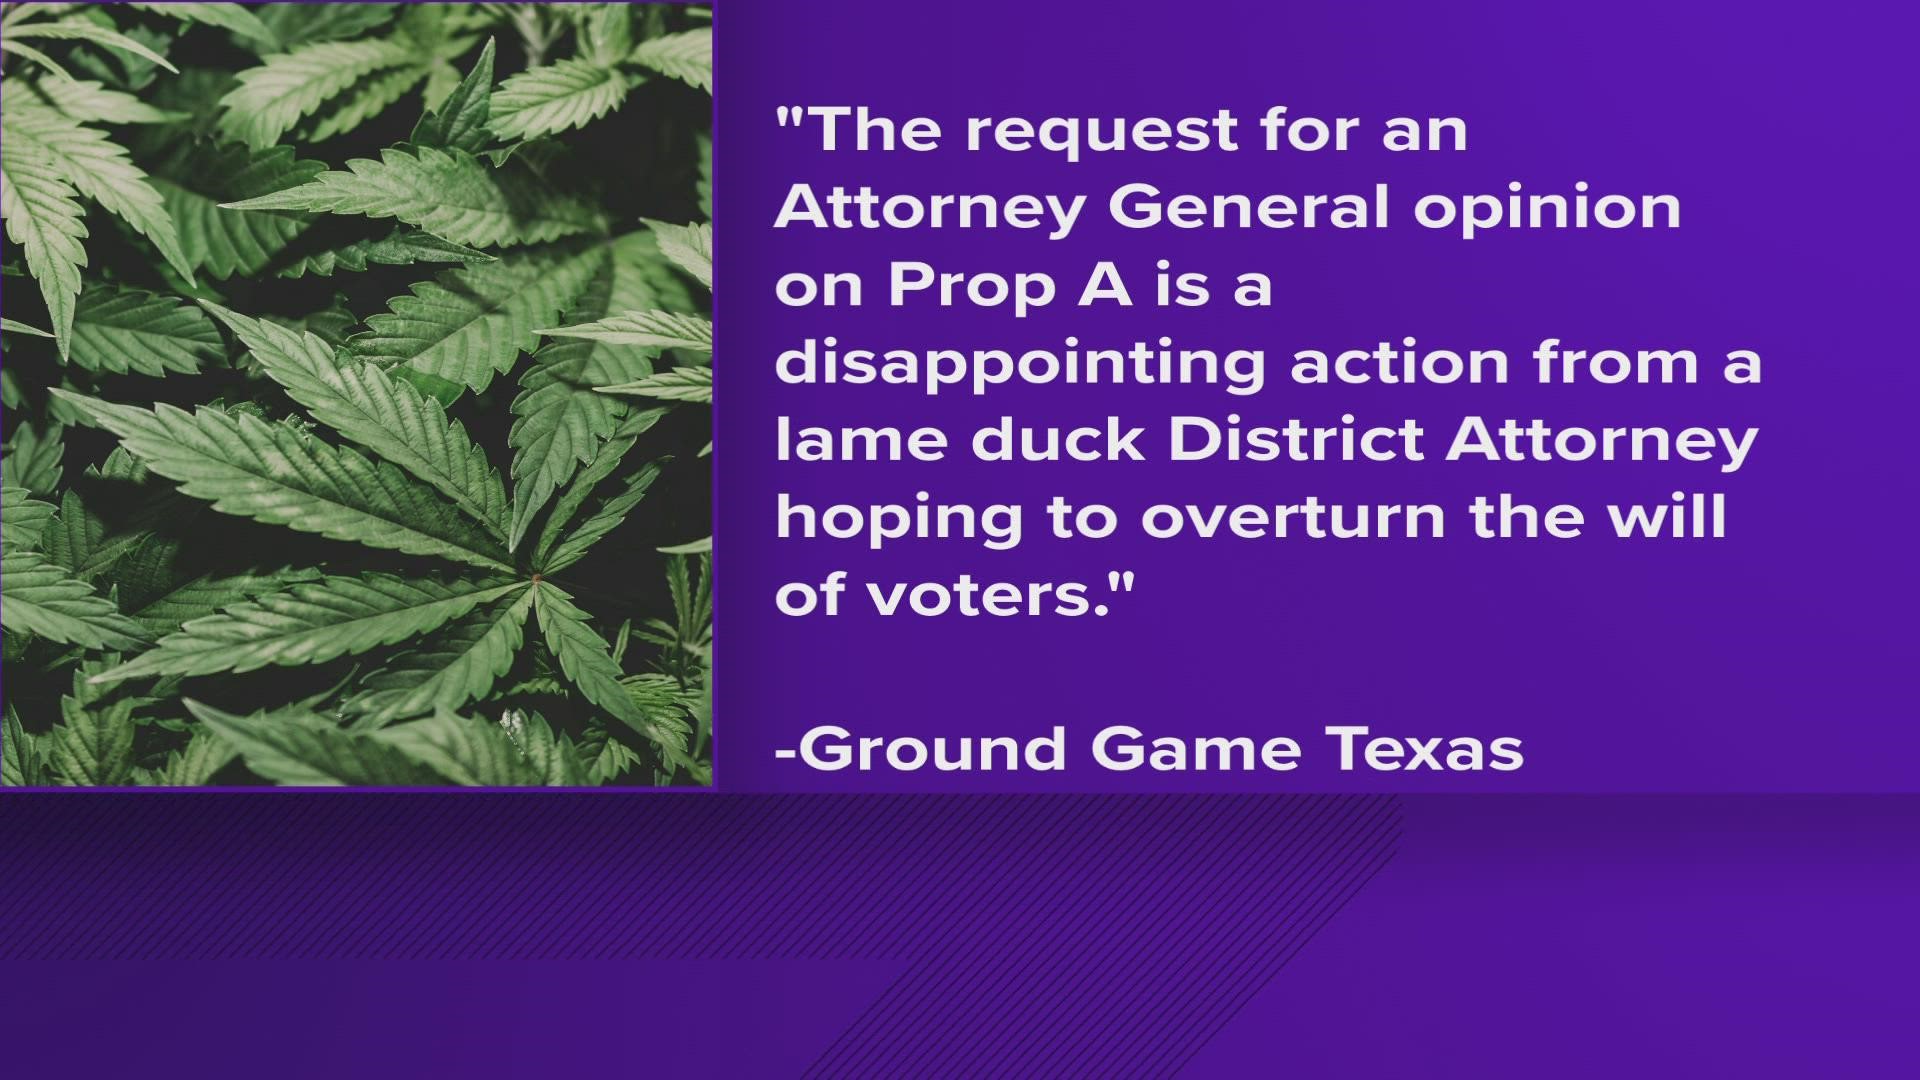 Ground Game Texas and Mano Amiga said DA Wes Mau's request to the Texas attorney general is a "disappointing action" as voters have already decided on the matter.